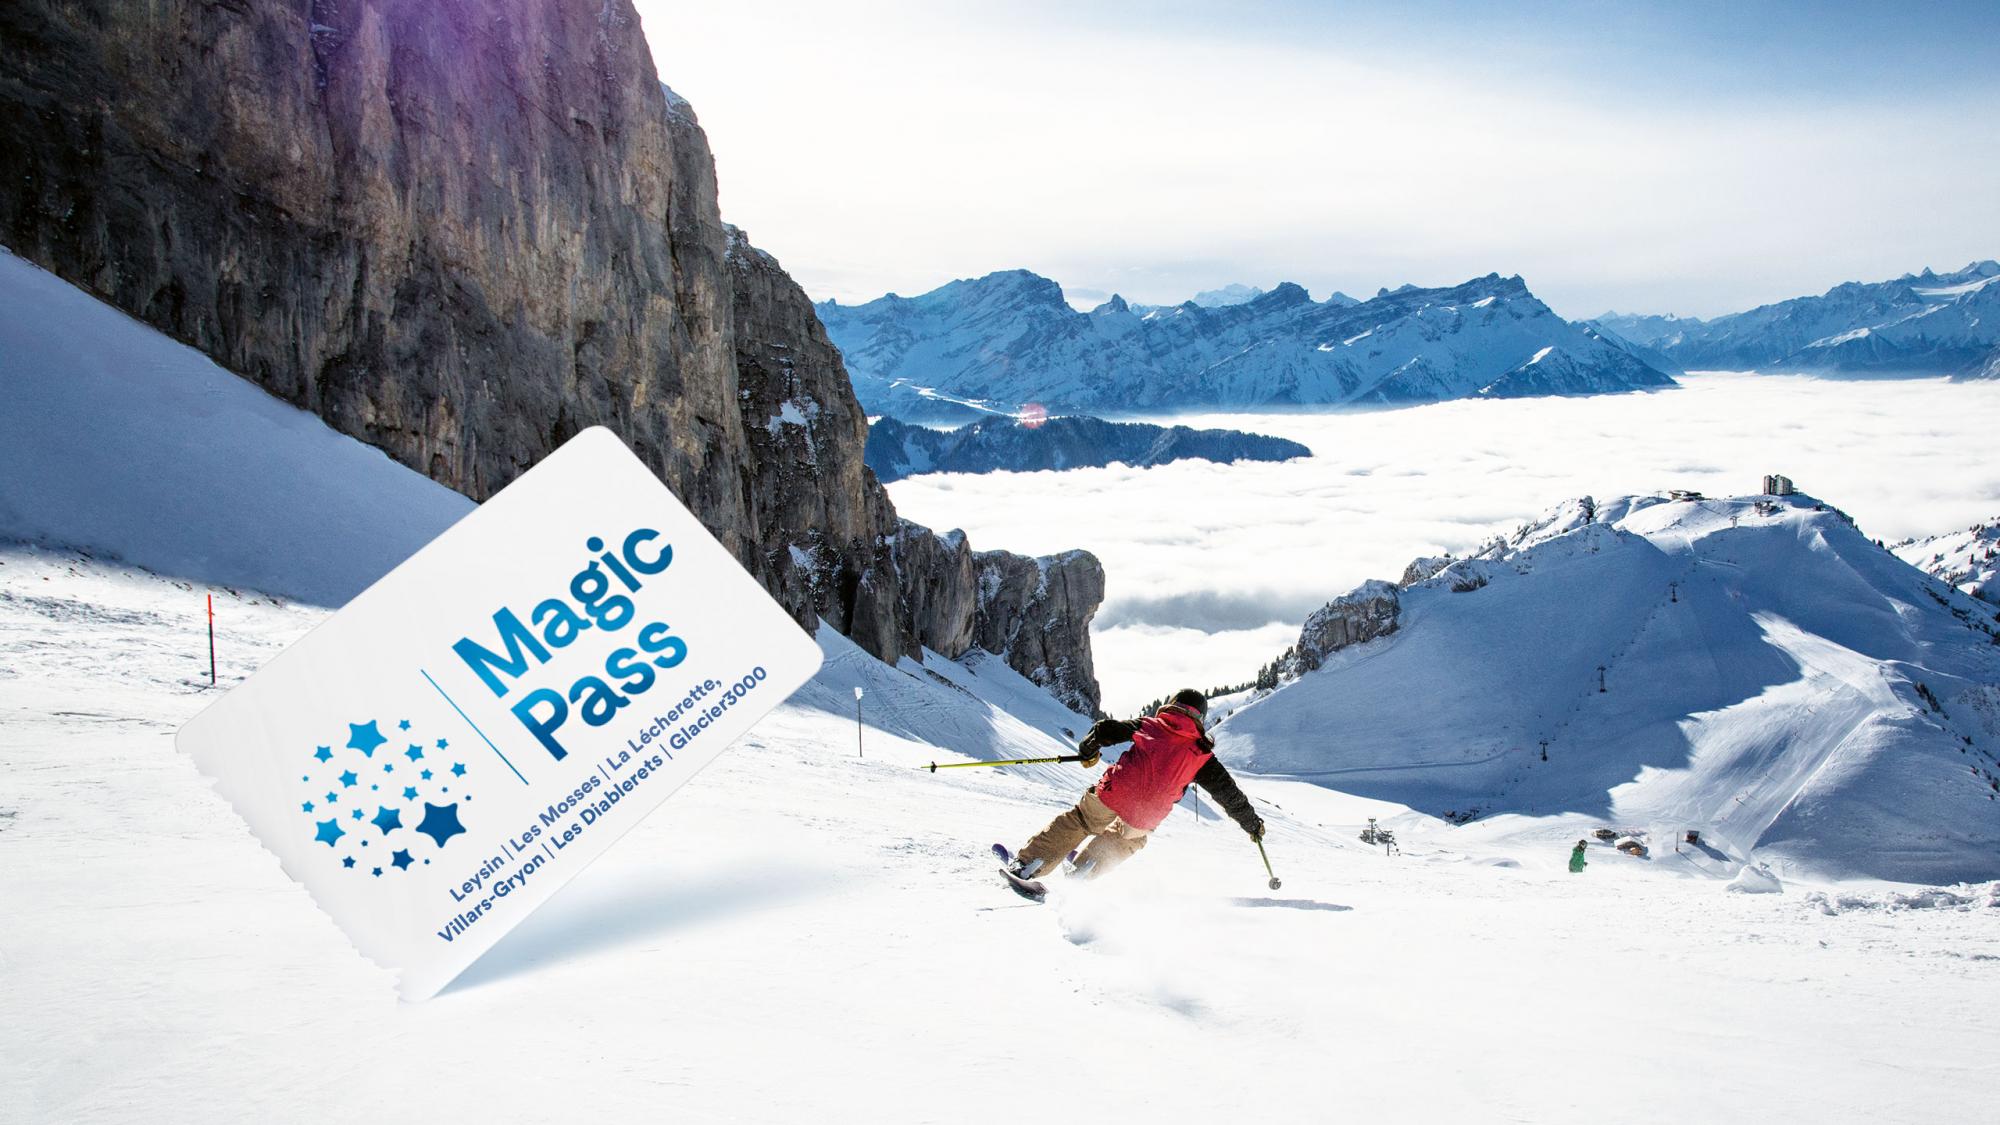 Swiss Magic Pass - 102,000 Skiers can't be wrong